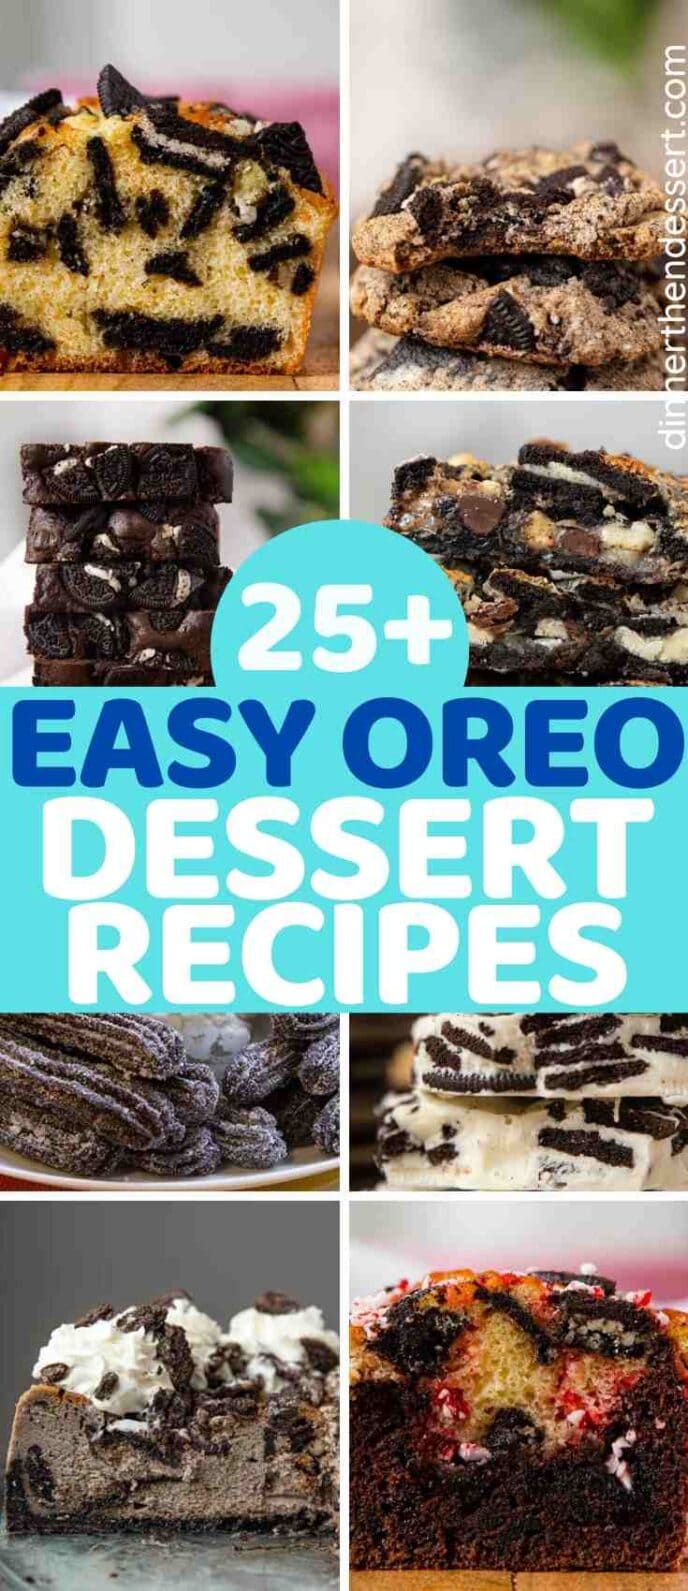 Collage of Oreo Desserts in tile format